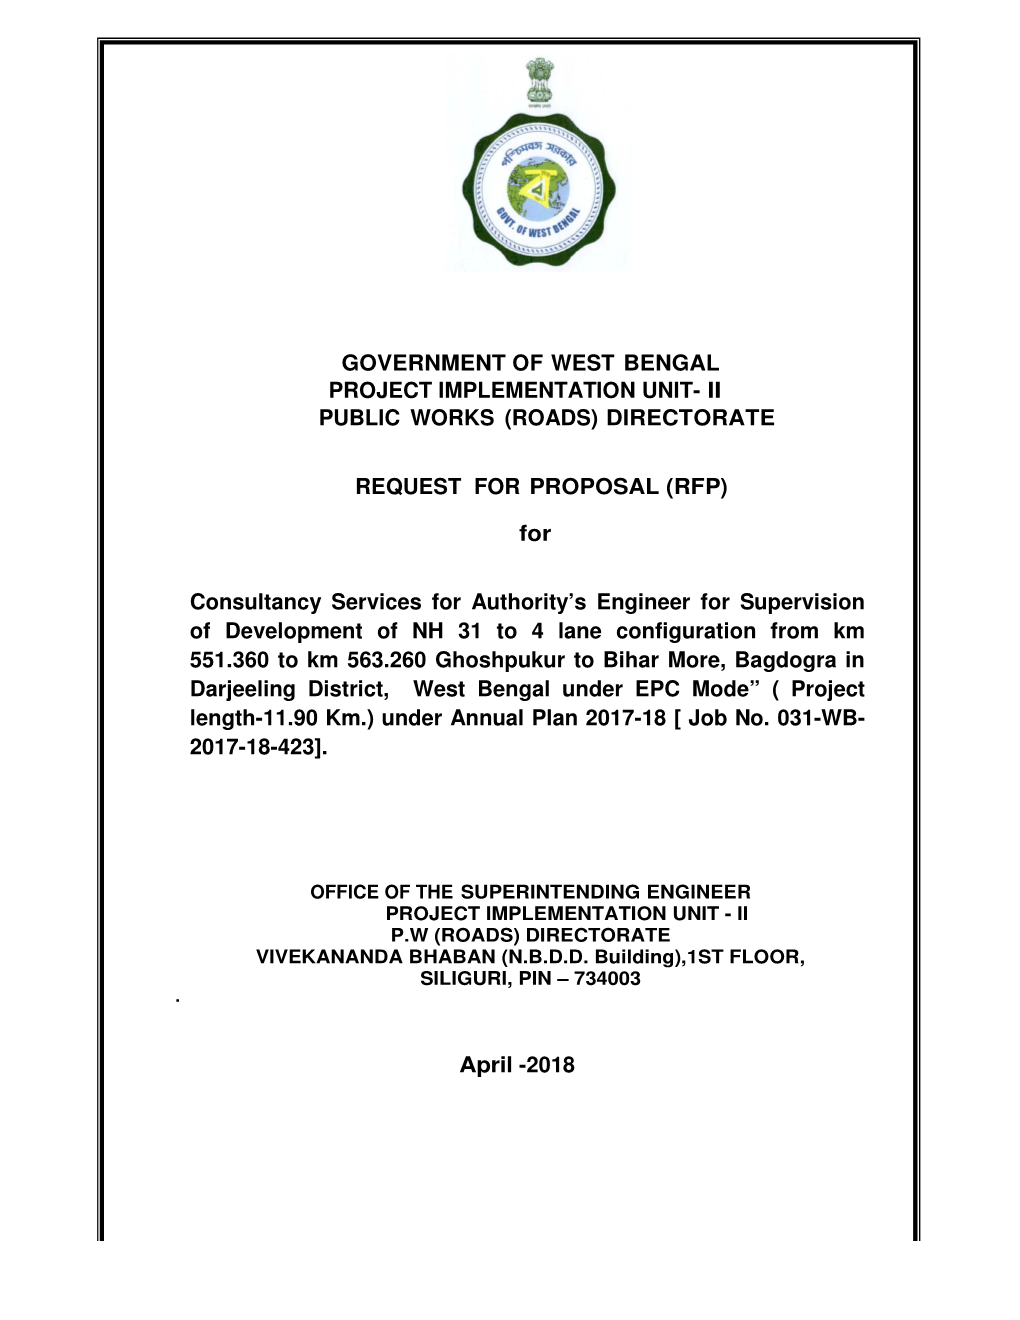 GOVERNMENT of WEST BENGAL PROJECT IMPLEMENTATION UNIT- II PUBLIC WORKS (ROADS) DIRECTORATE REQUEST for PROPOSAL (RFP) For